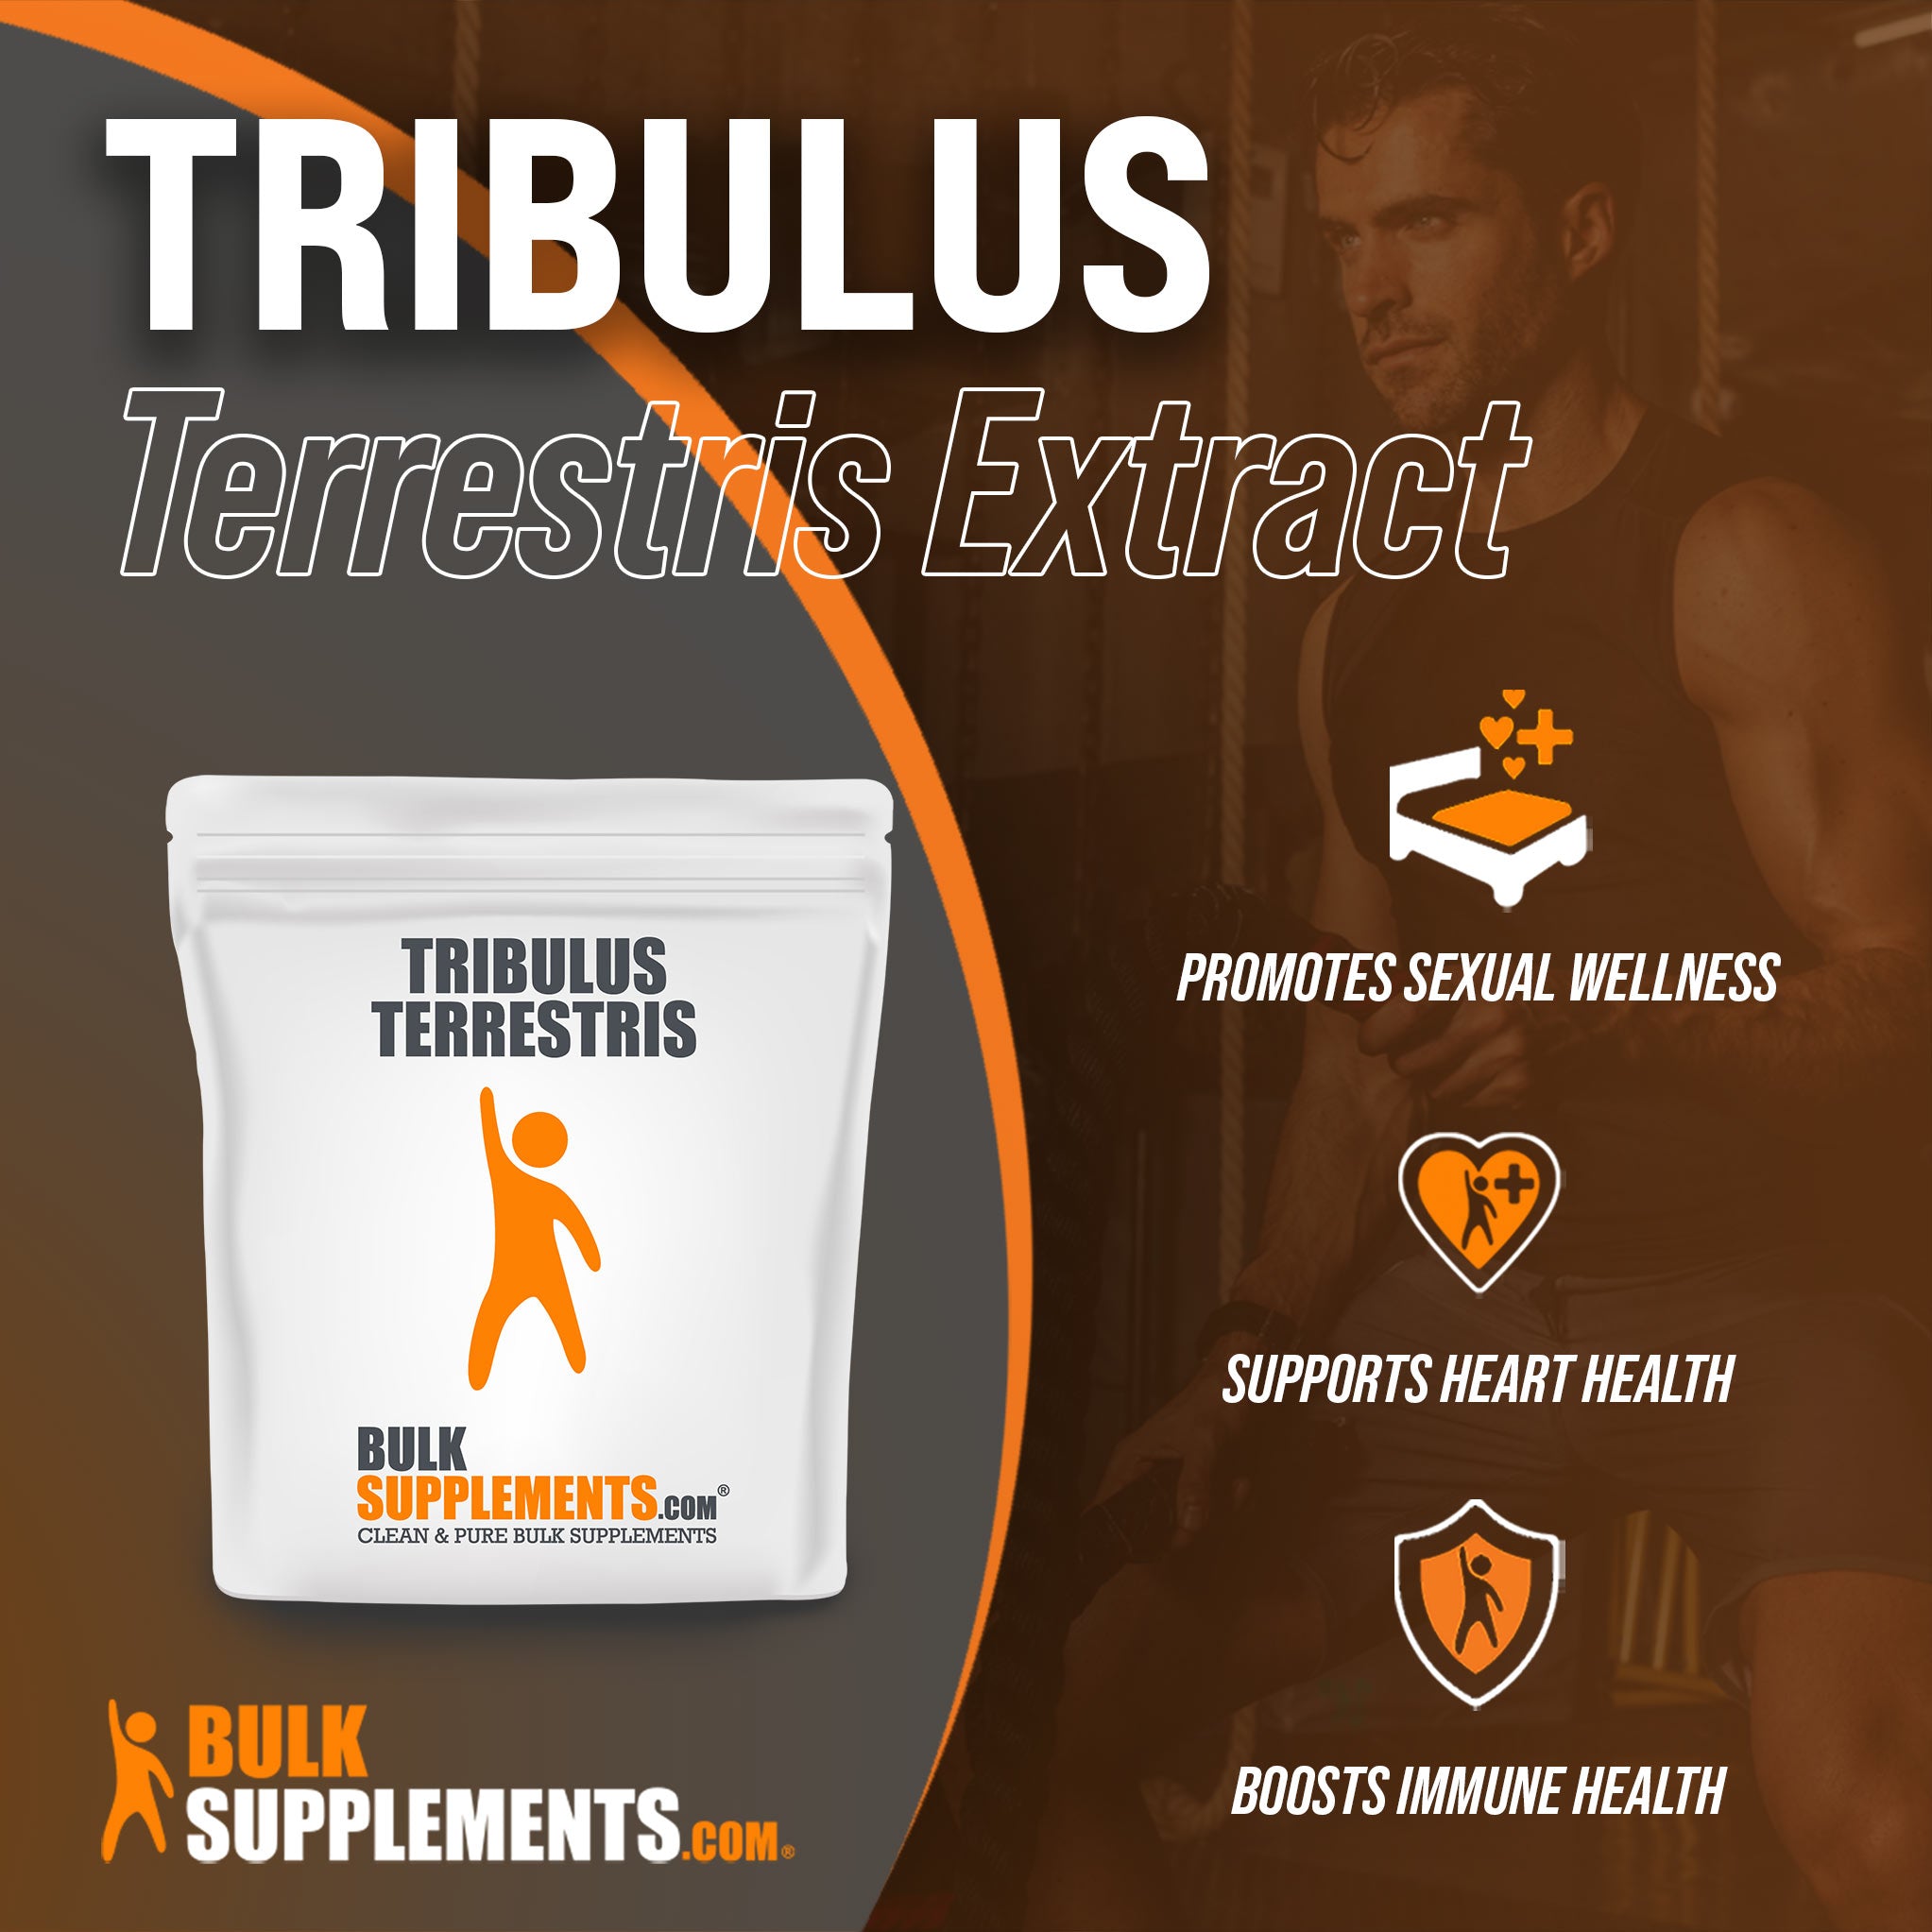 Benefits of Tribulus Terrestris Extract: promotes sexual wellness, supports heart health, boosts immune health